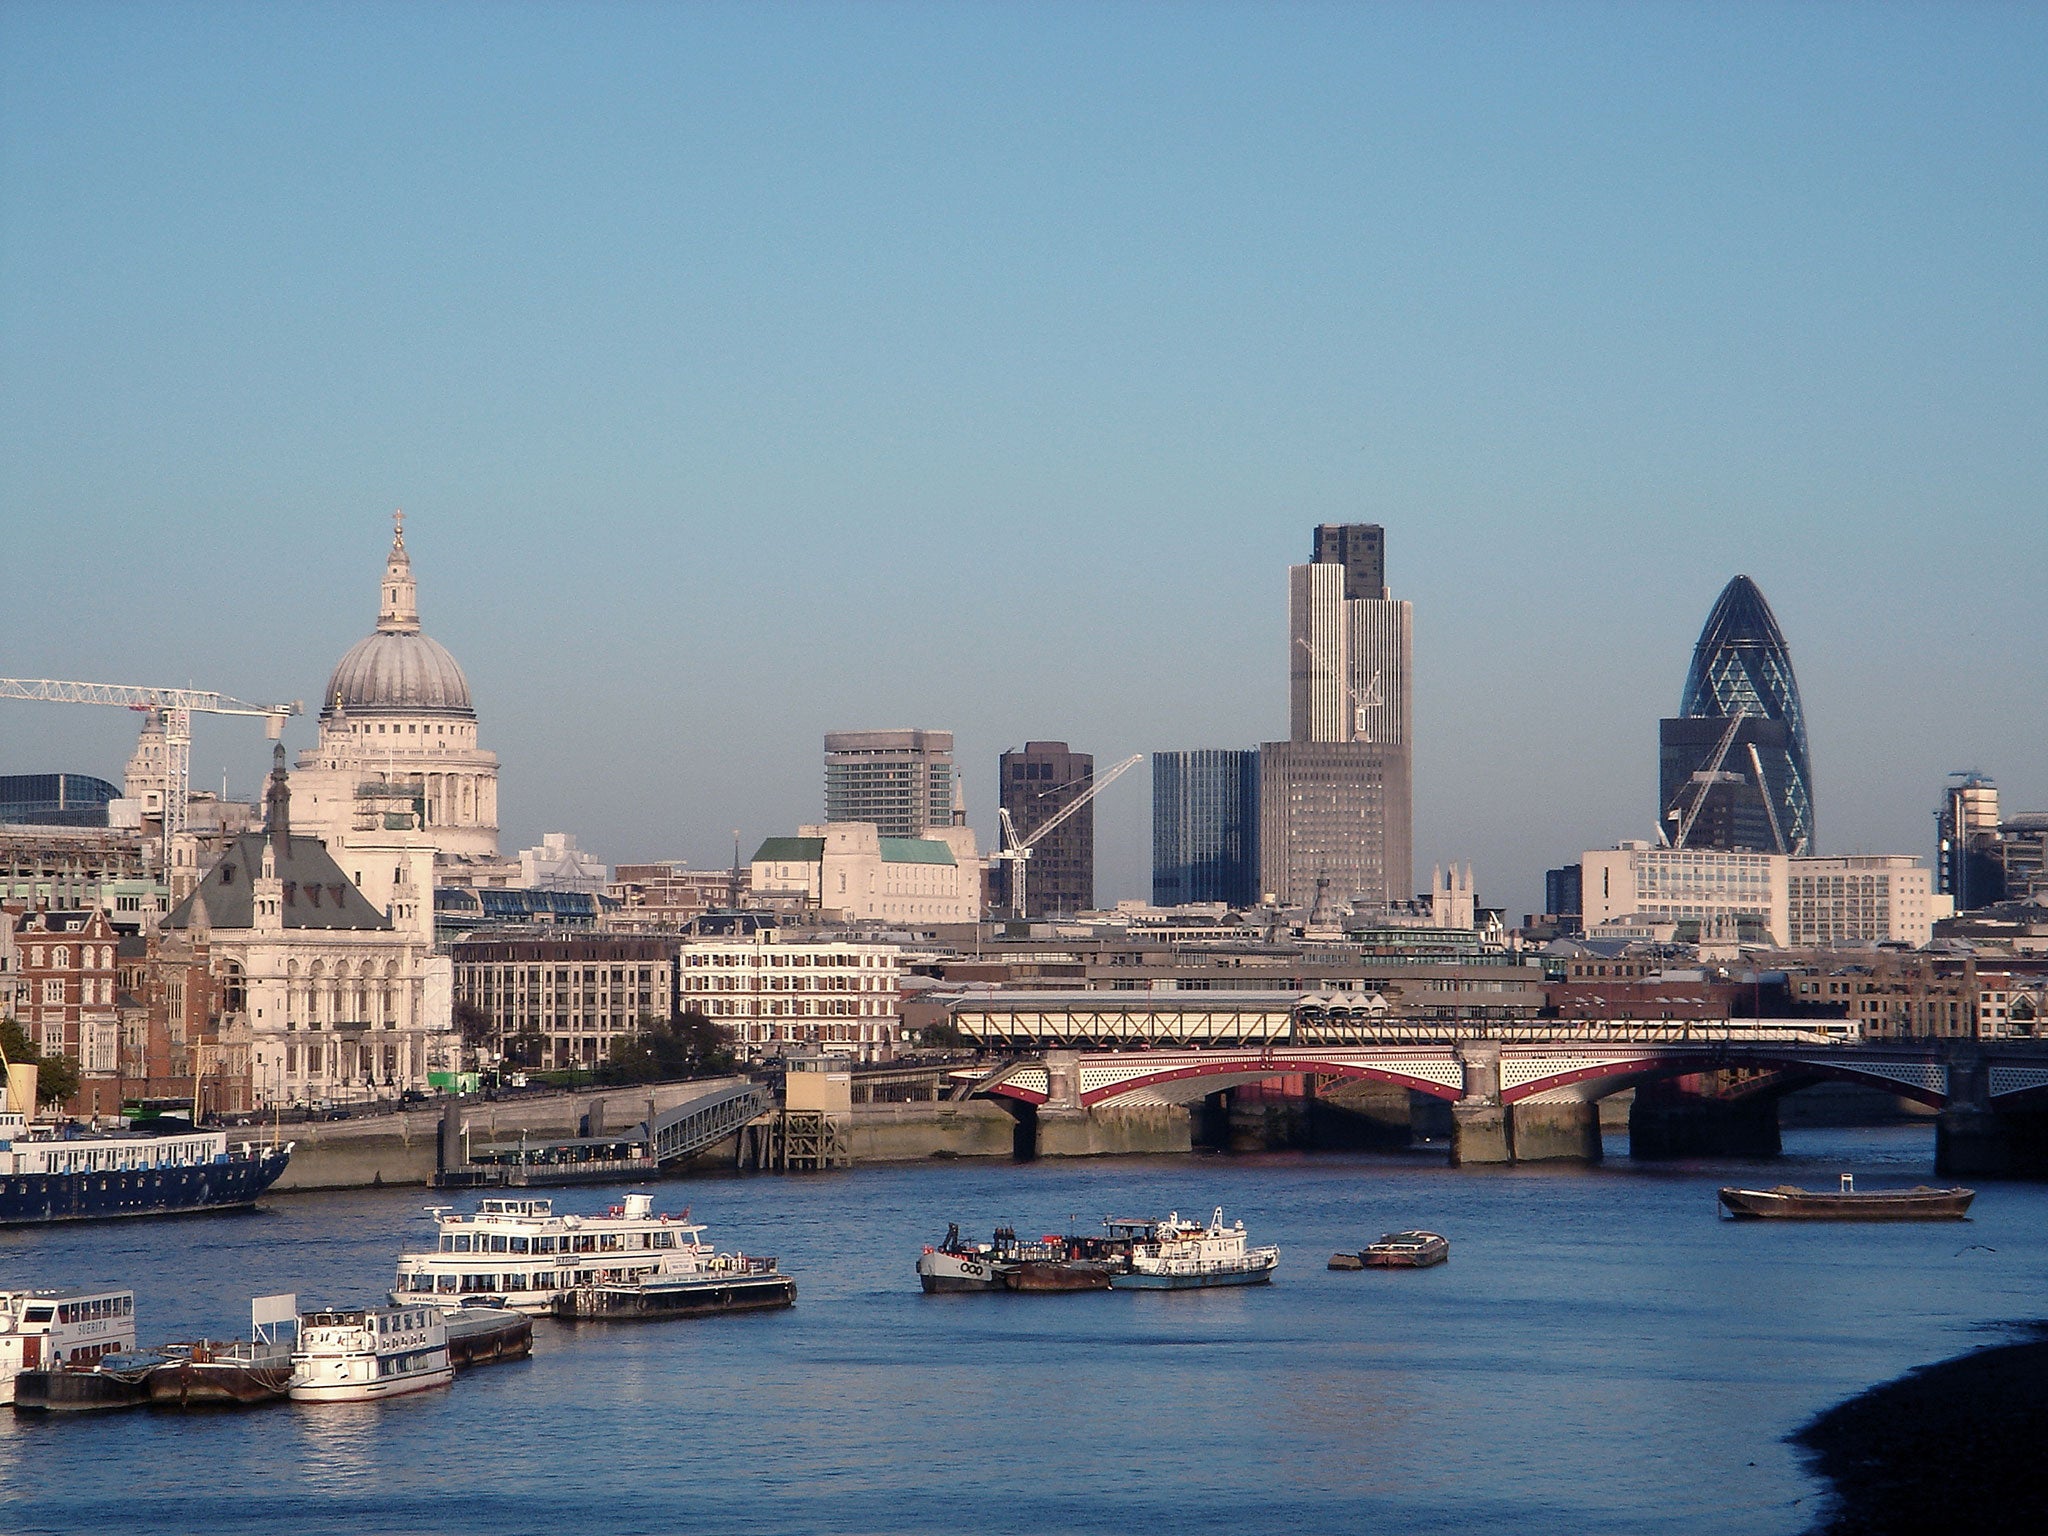 London has become too expensive for around 60,000 people who left between June 2012 to June 2013